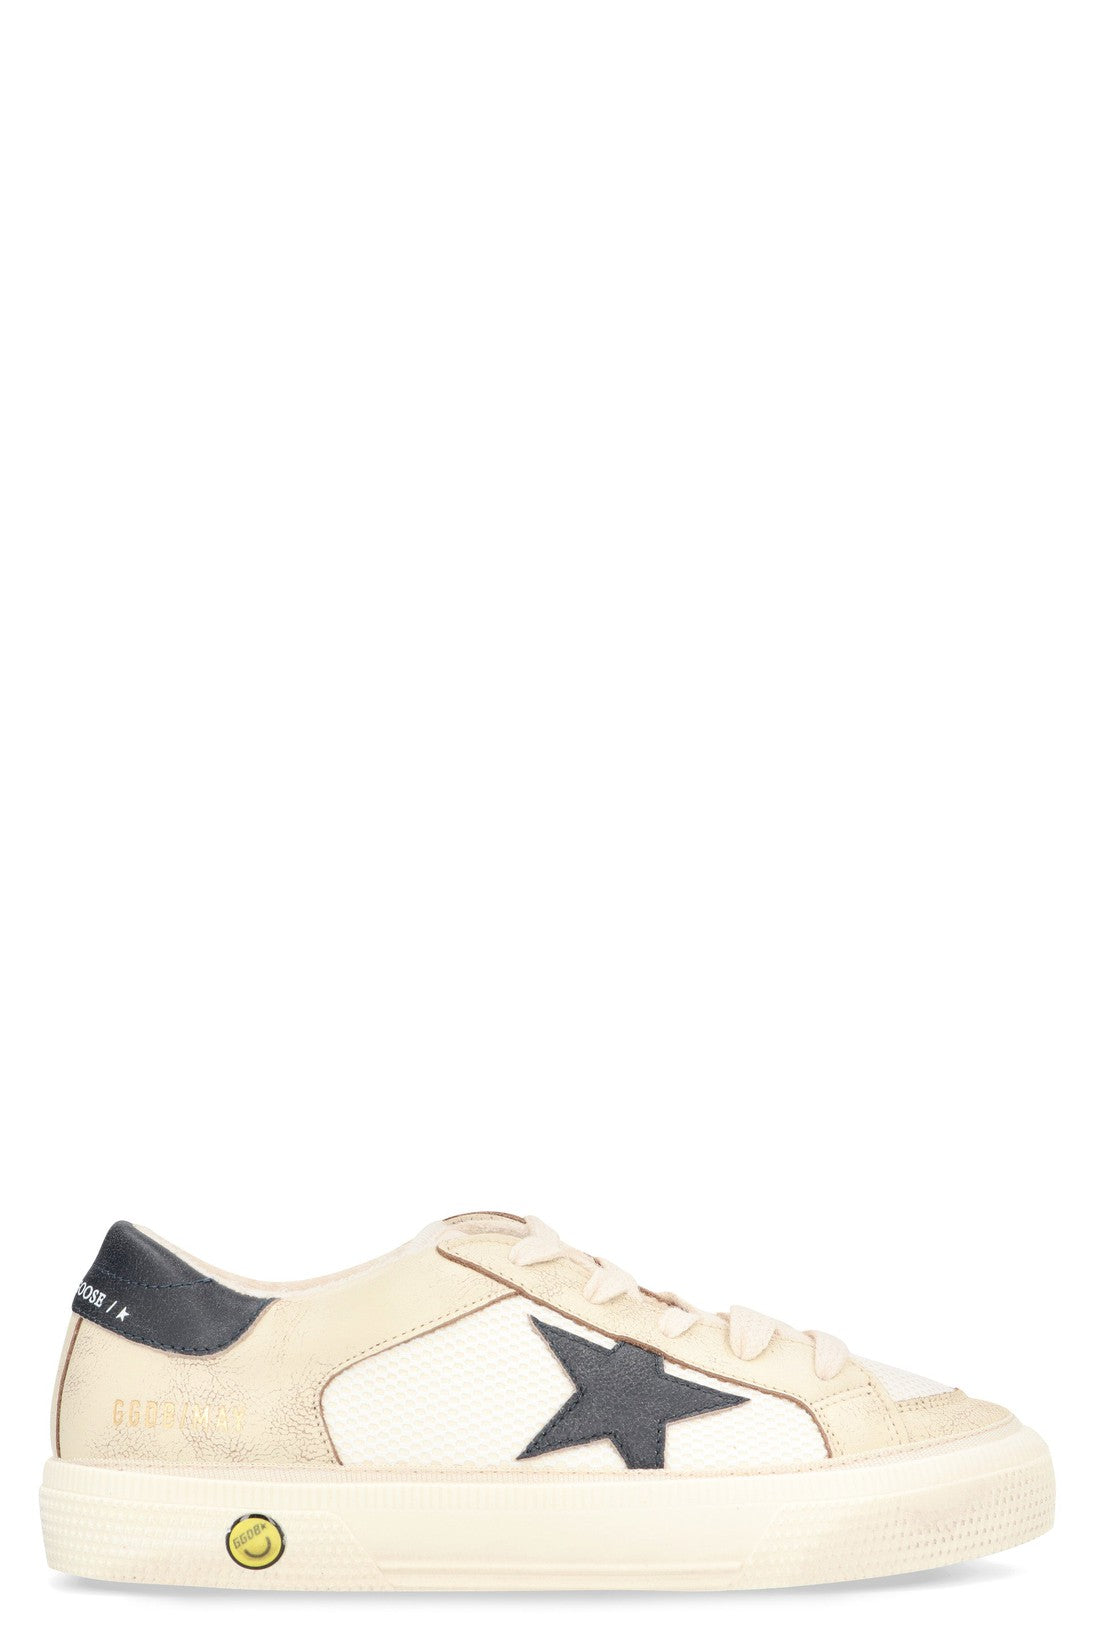 Golden Goose Kids-OUTLET-SALE-May low-top sneakers-ARCHIVIST